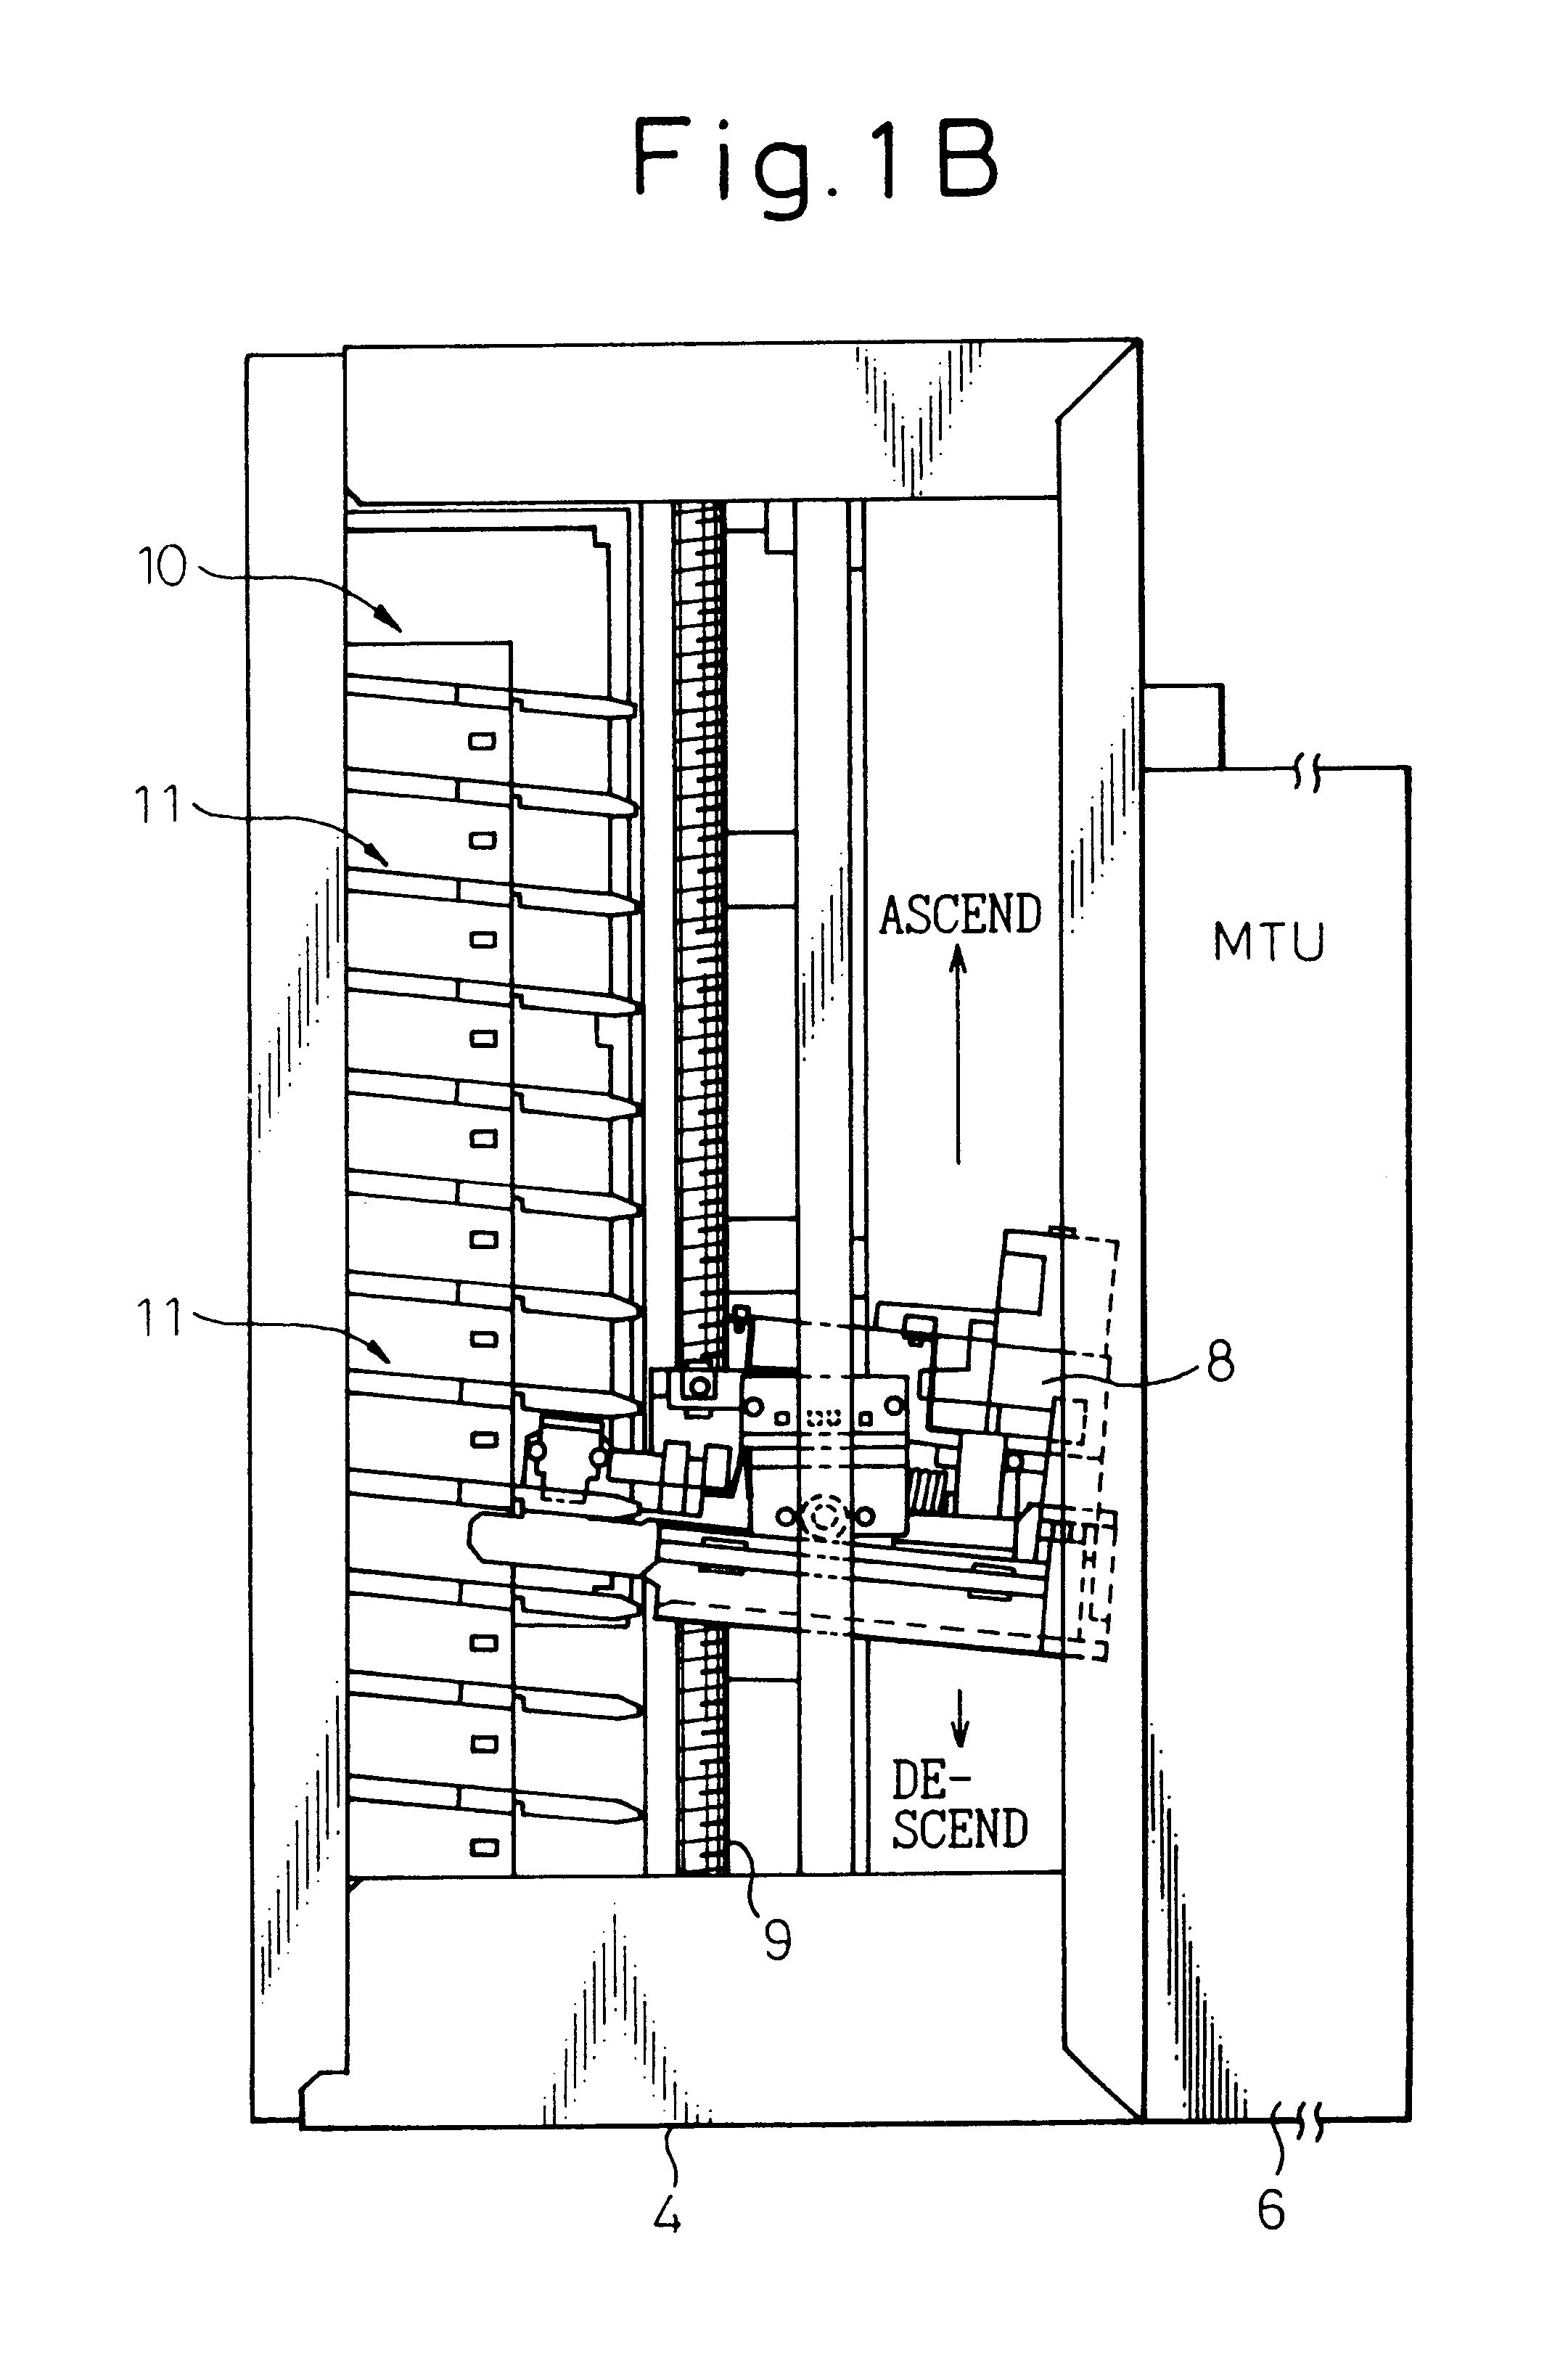 Apparatus for automatically conveying cartridges